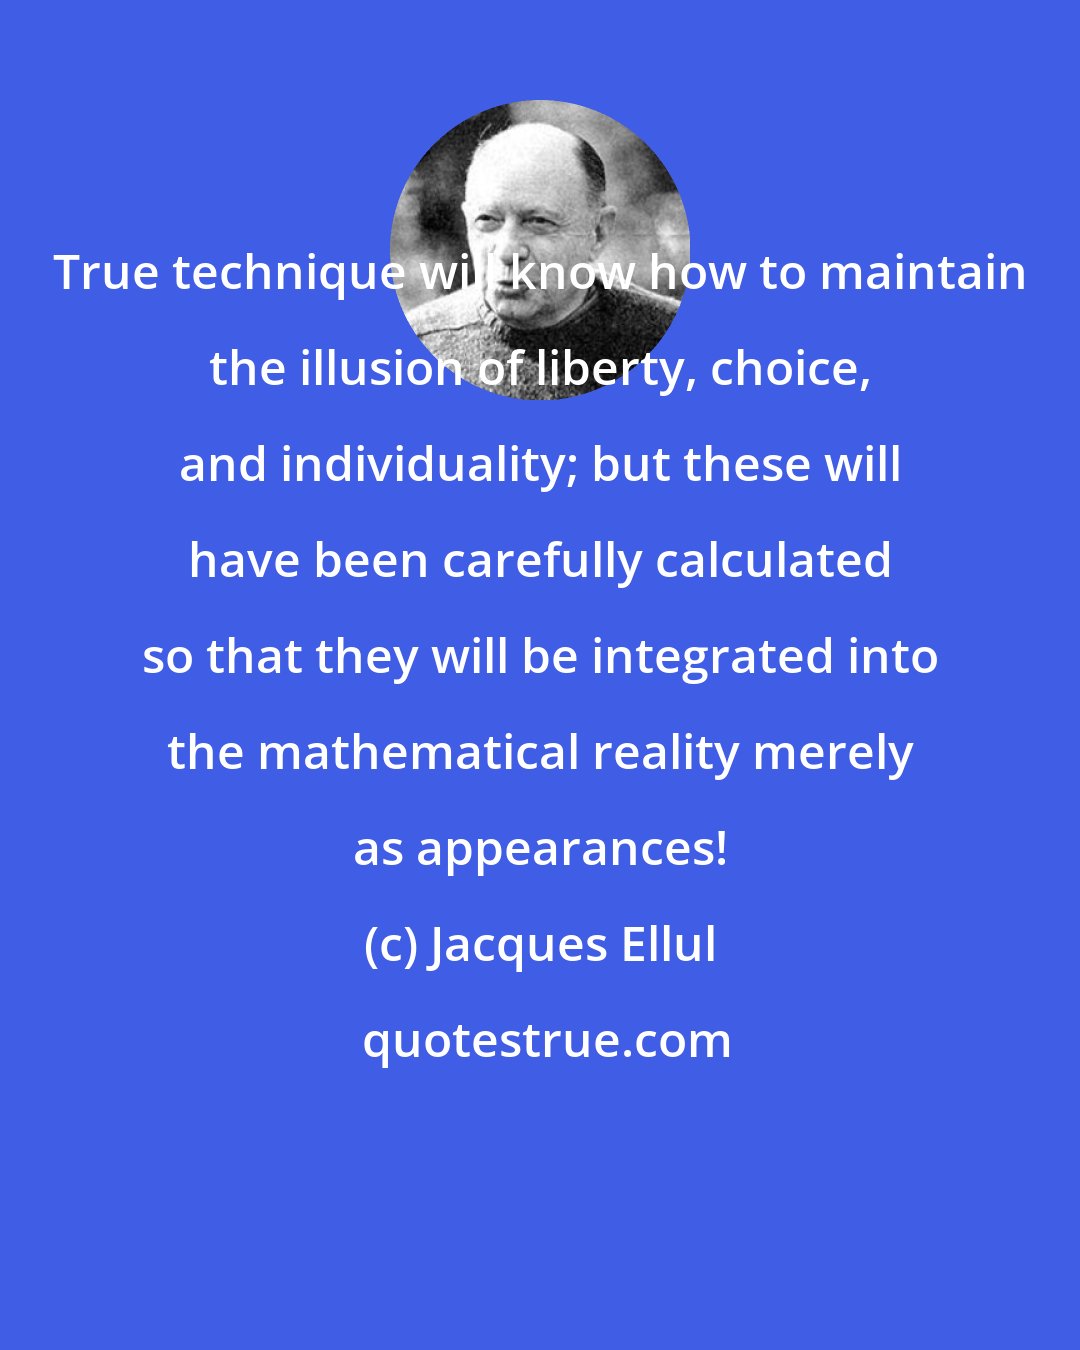 Jacques Ellul: True technique will know how to maintain the illusion of liberty, choice, and individuality; but these will have been carefully calculated so that they will be integrated into the mathematical reality merely as appearances!